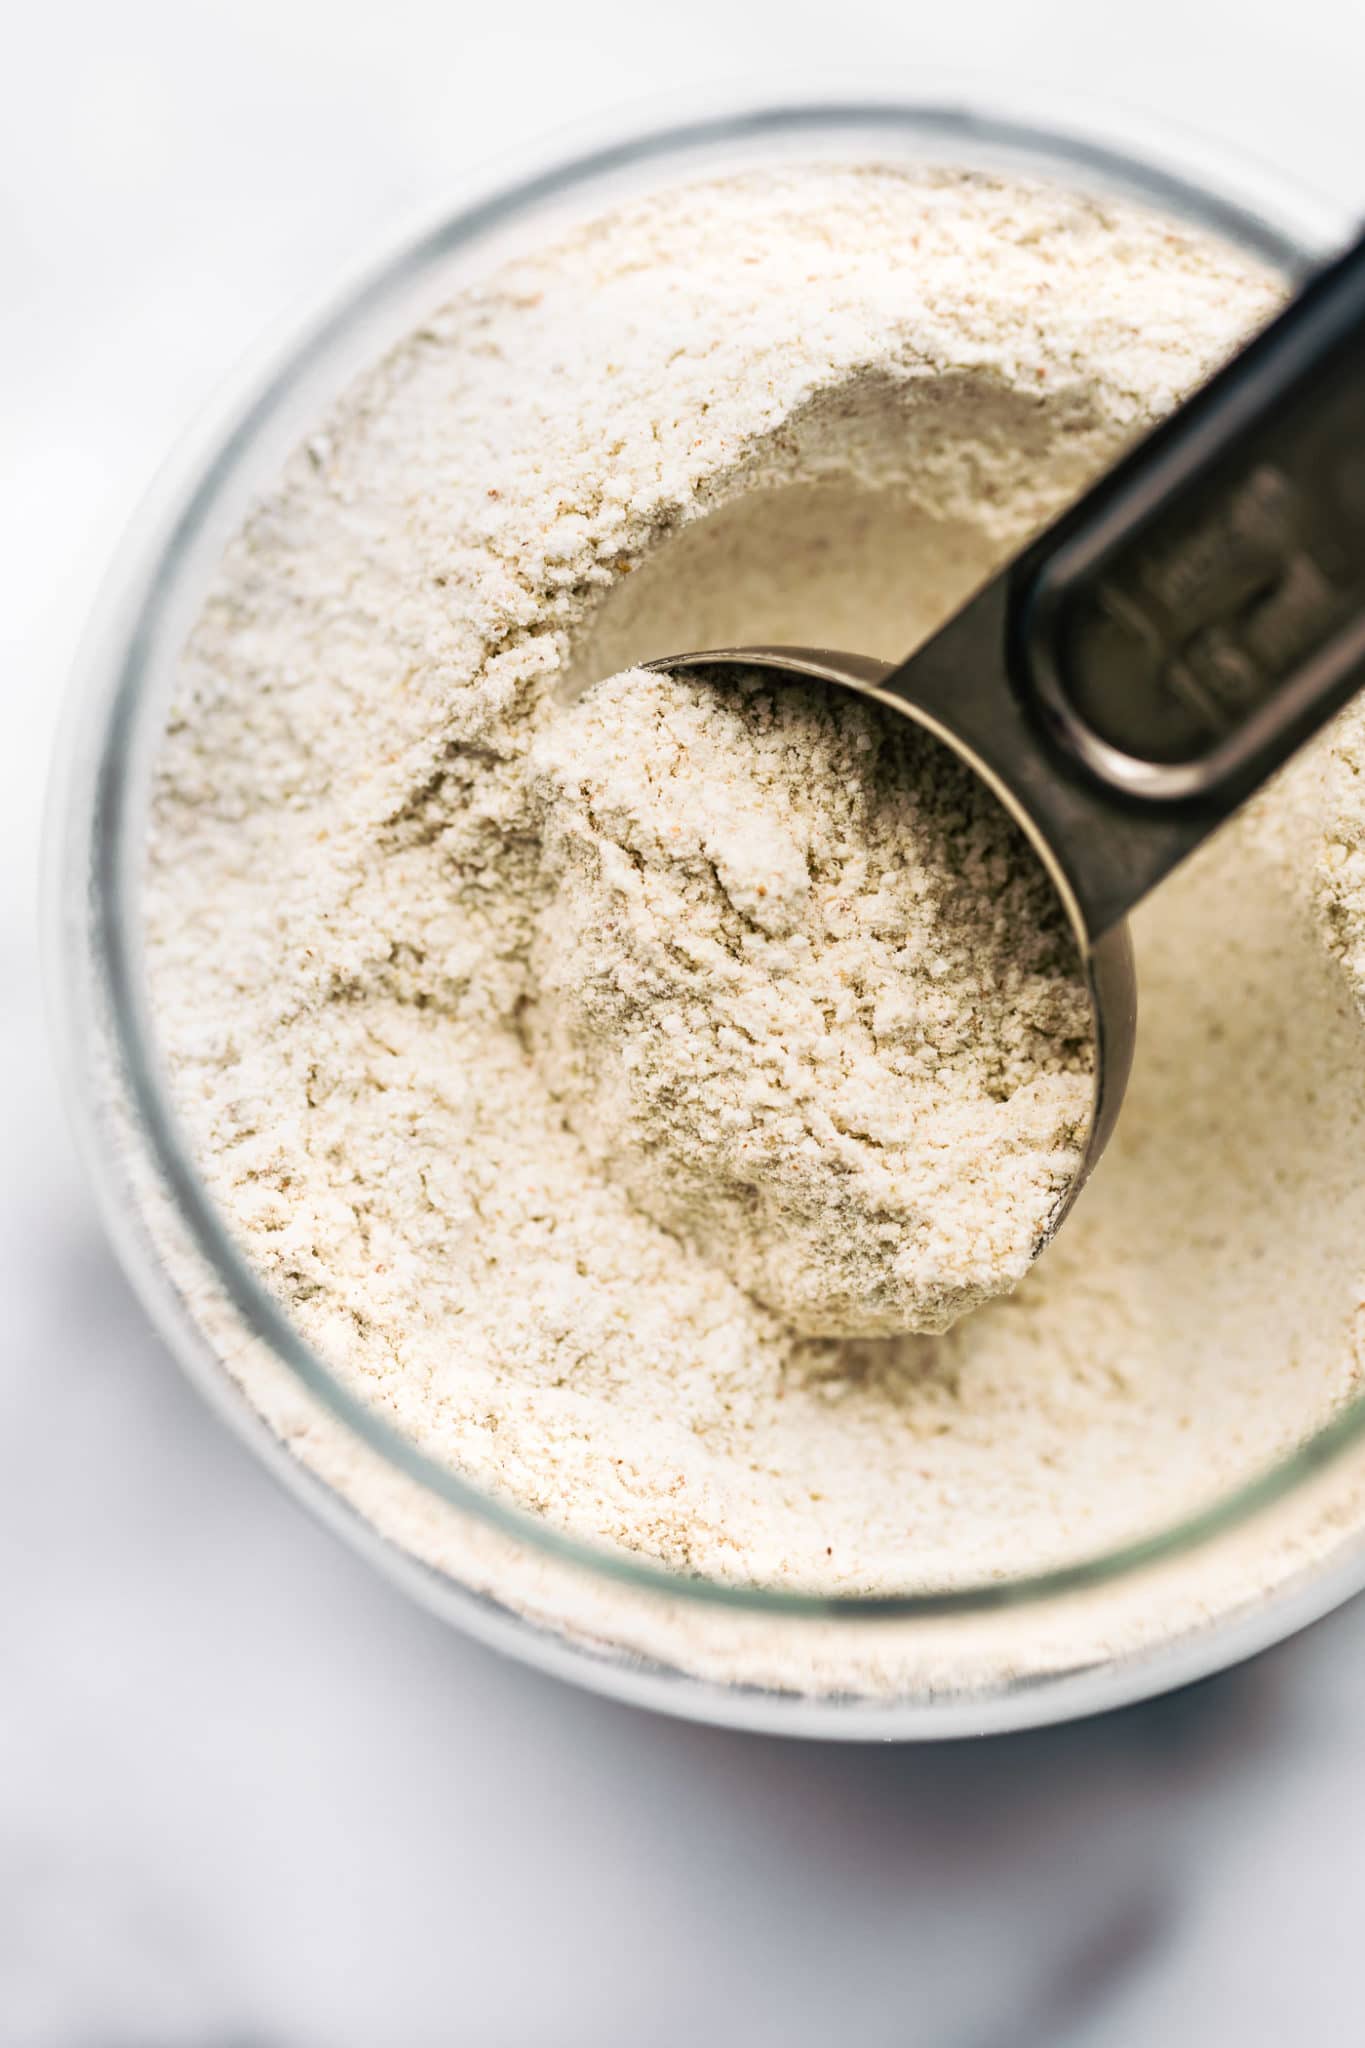 a glass jar full of oat flour with a measuring spoon dipping into it